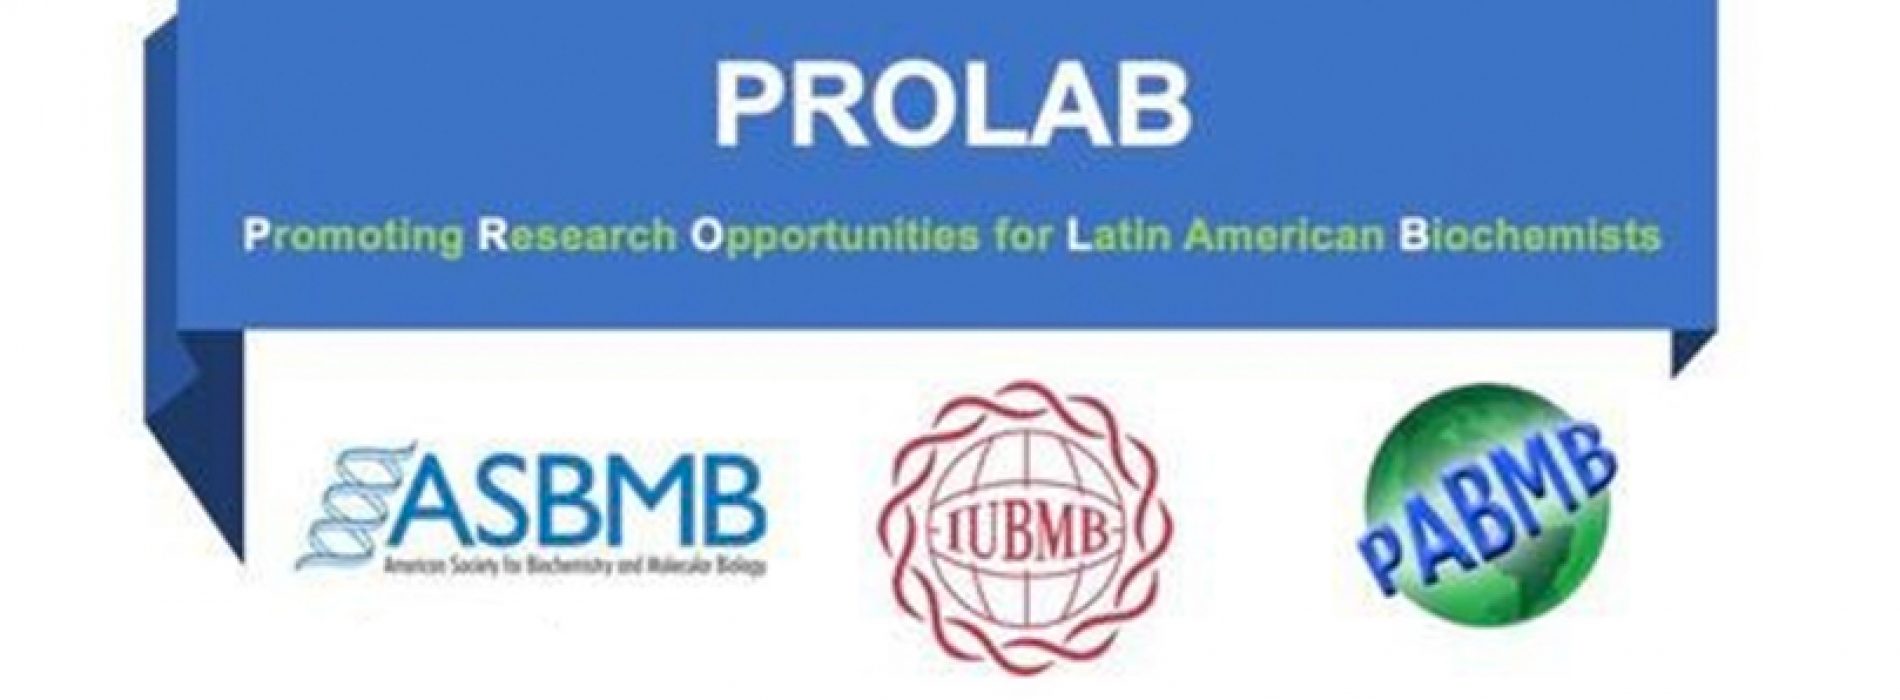 Promoting Research Opportunities for Latin American Biochemists